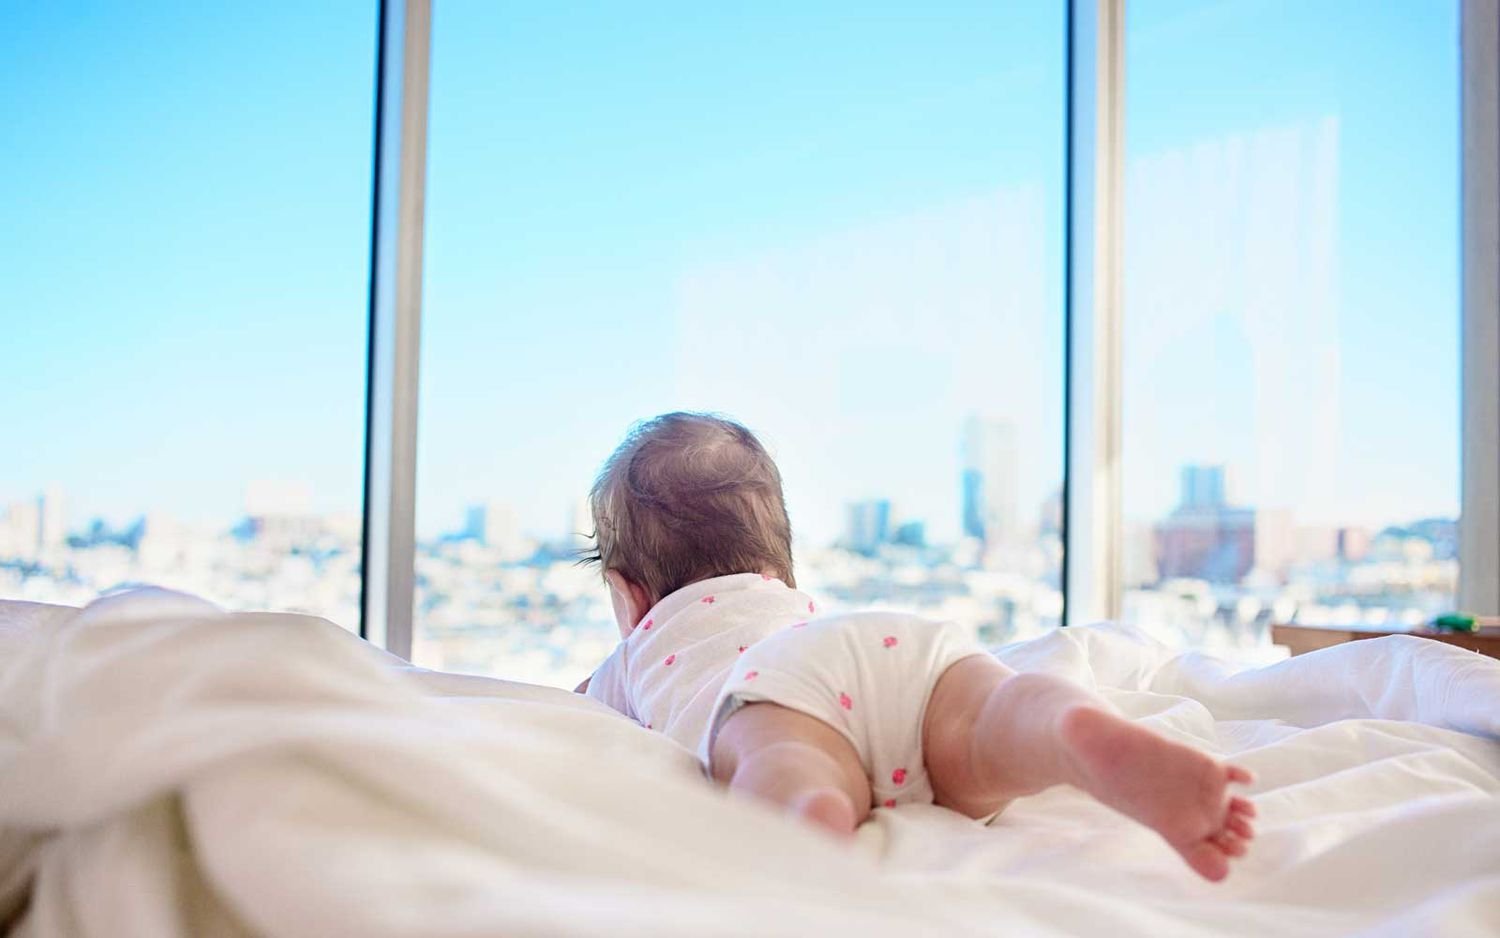 6 Tips for Staying in a Hotel or Airbnb With a Baby From Parents Who Have Done It